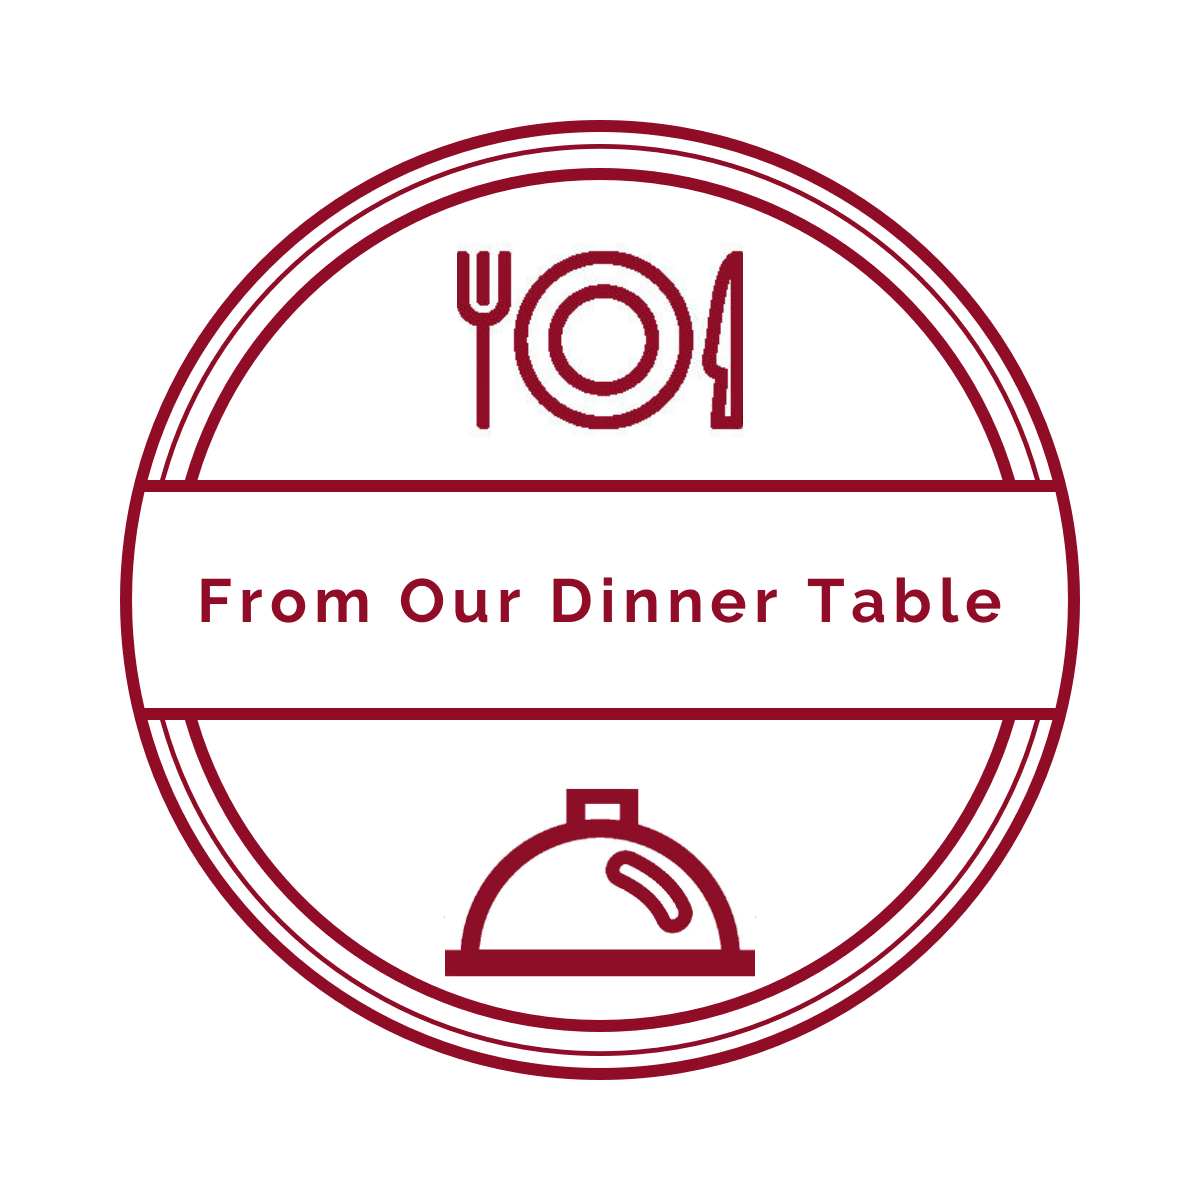 From Our Dinner Table event logo